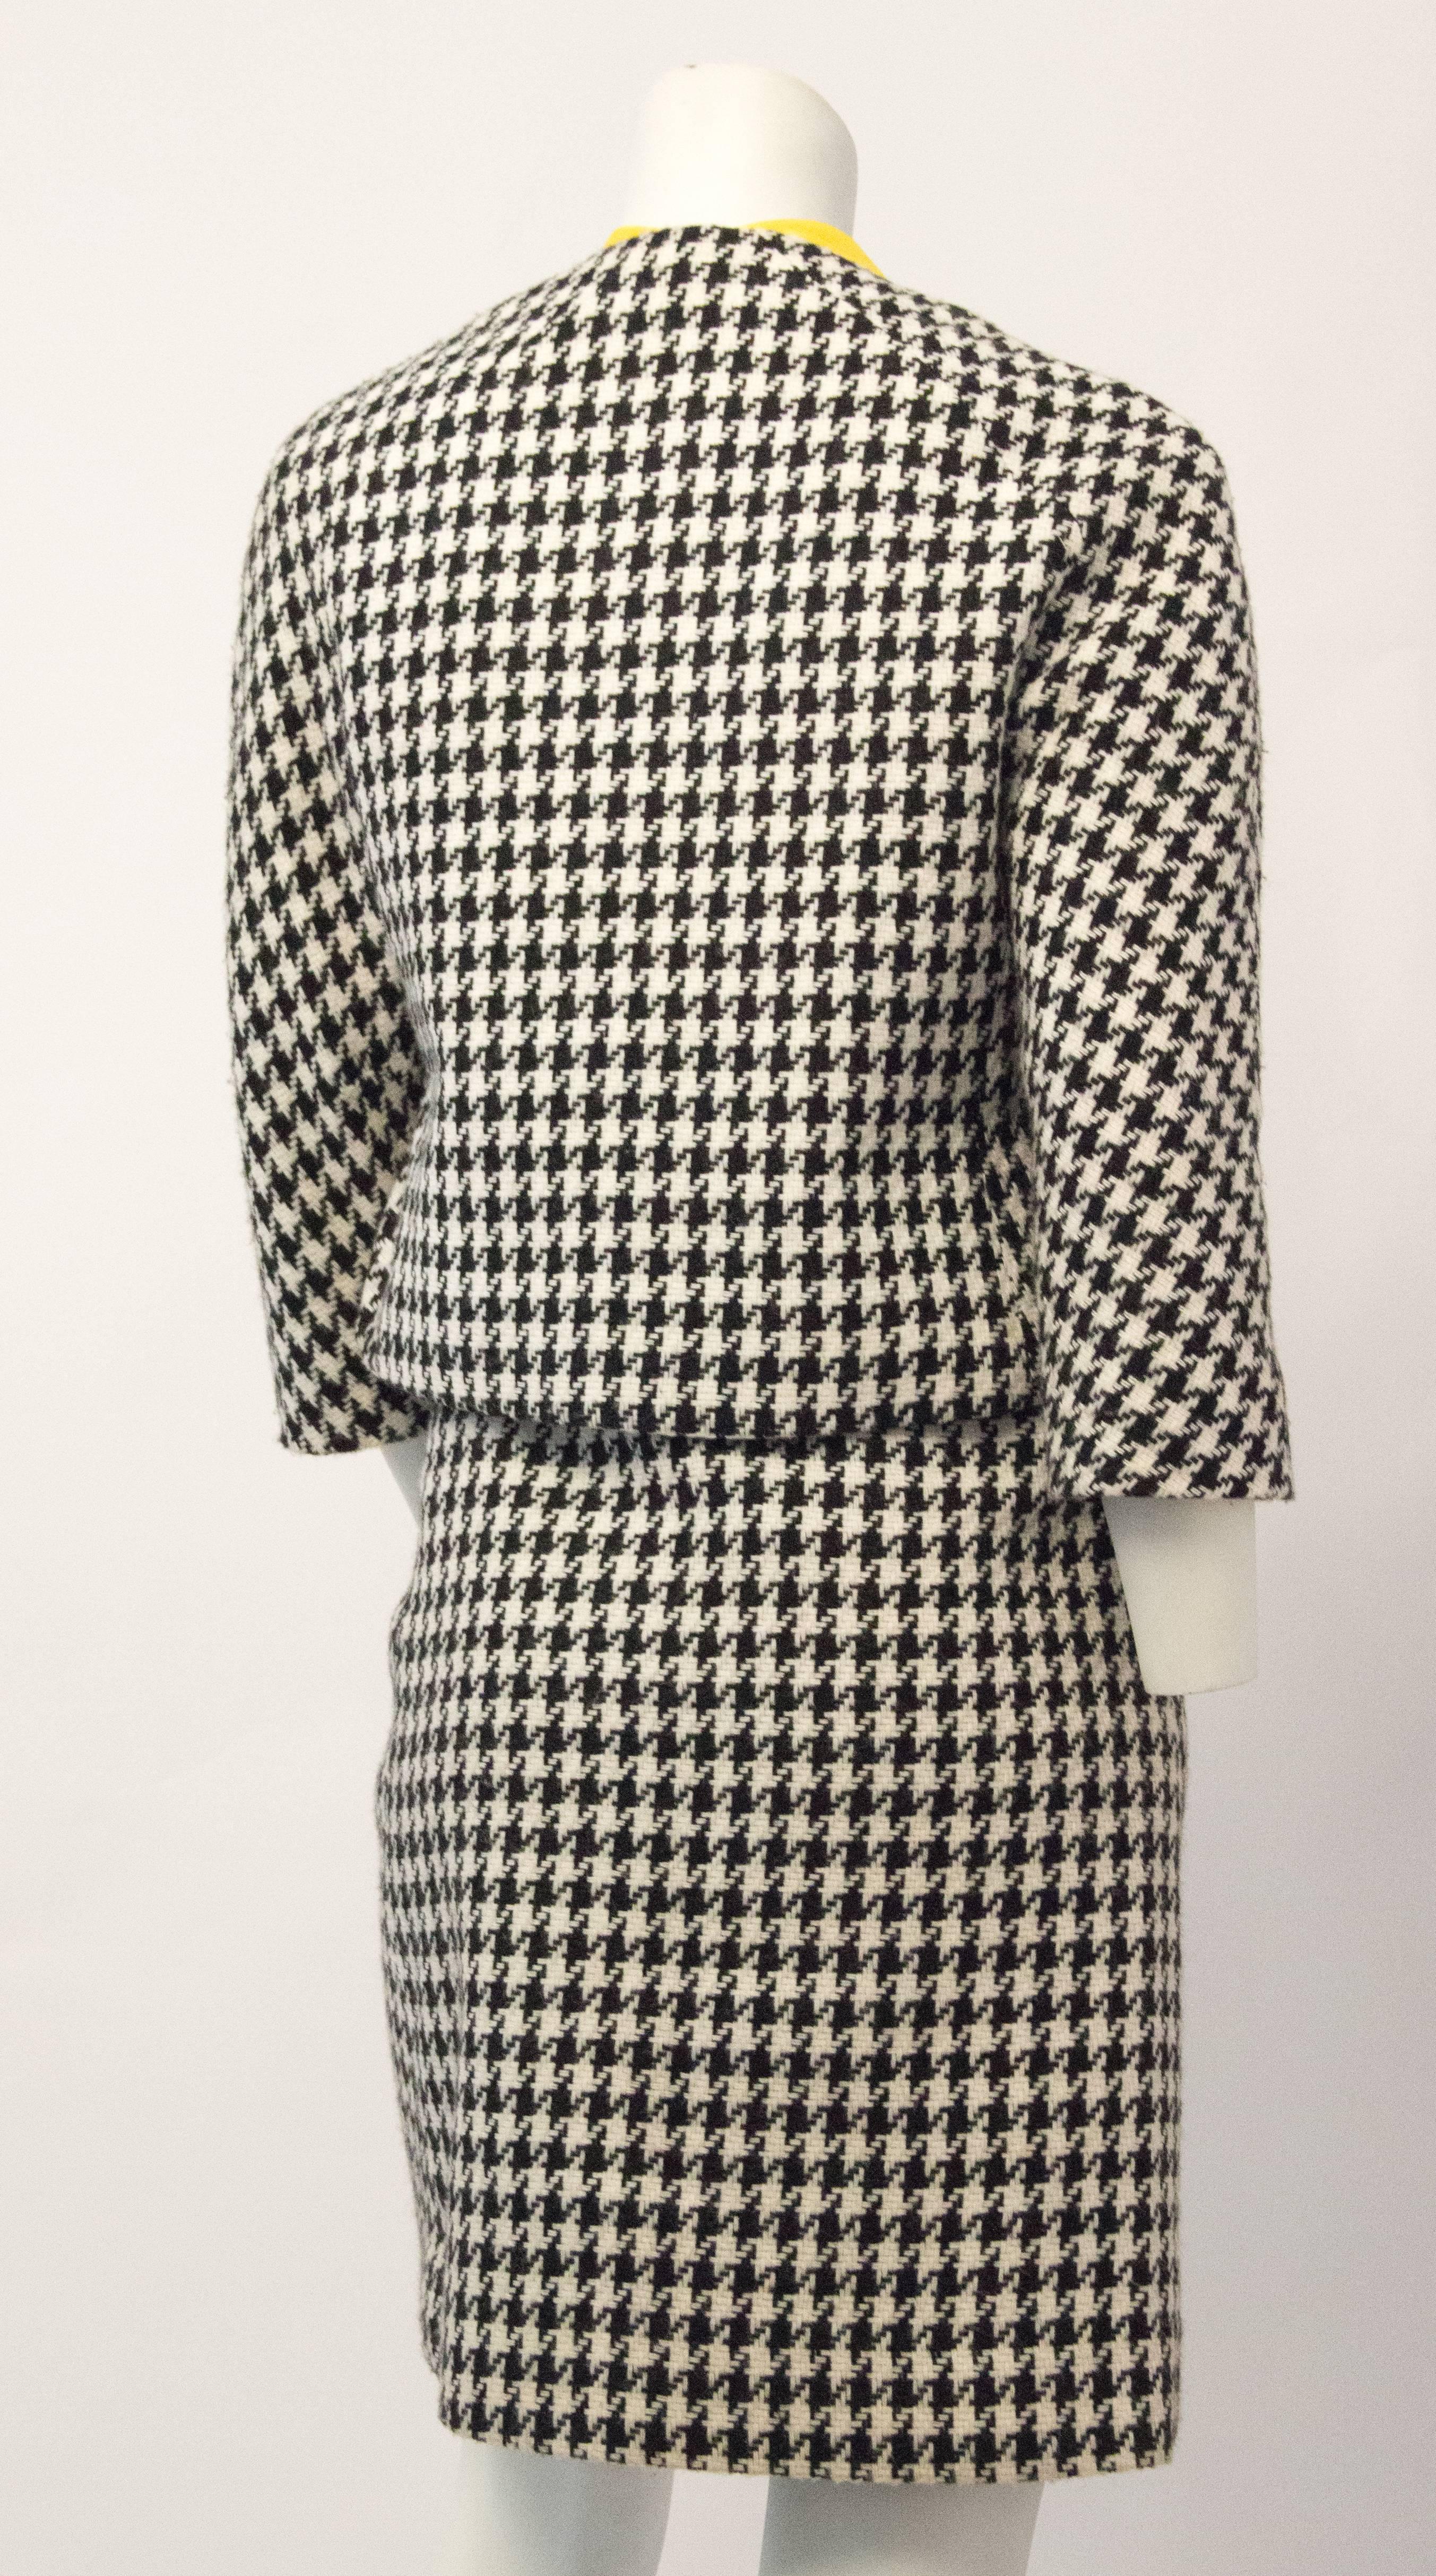 60s Joseph Magnin houndstooth suit with original matching yellow sleeveless blouse. Jacket is lined, and buttons up the front. Mock flap pockets. Fitted blouse buttons up the back and ties at the neck. Skirt is lined and zips up the left side. 

